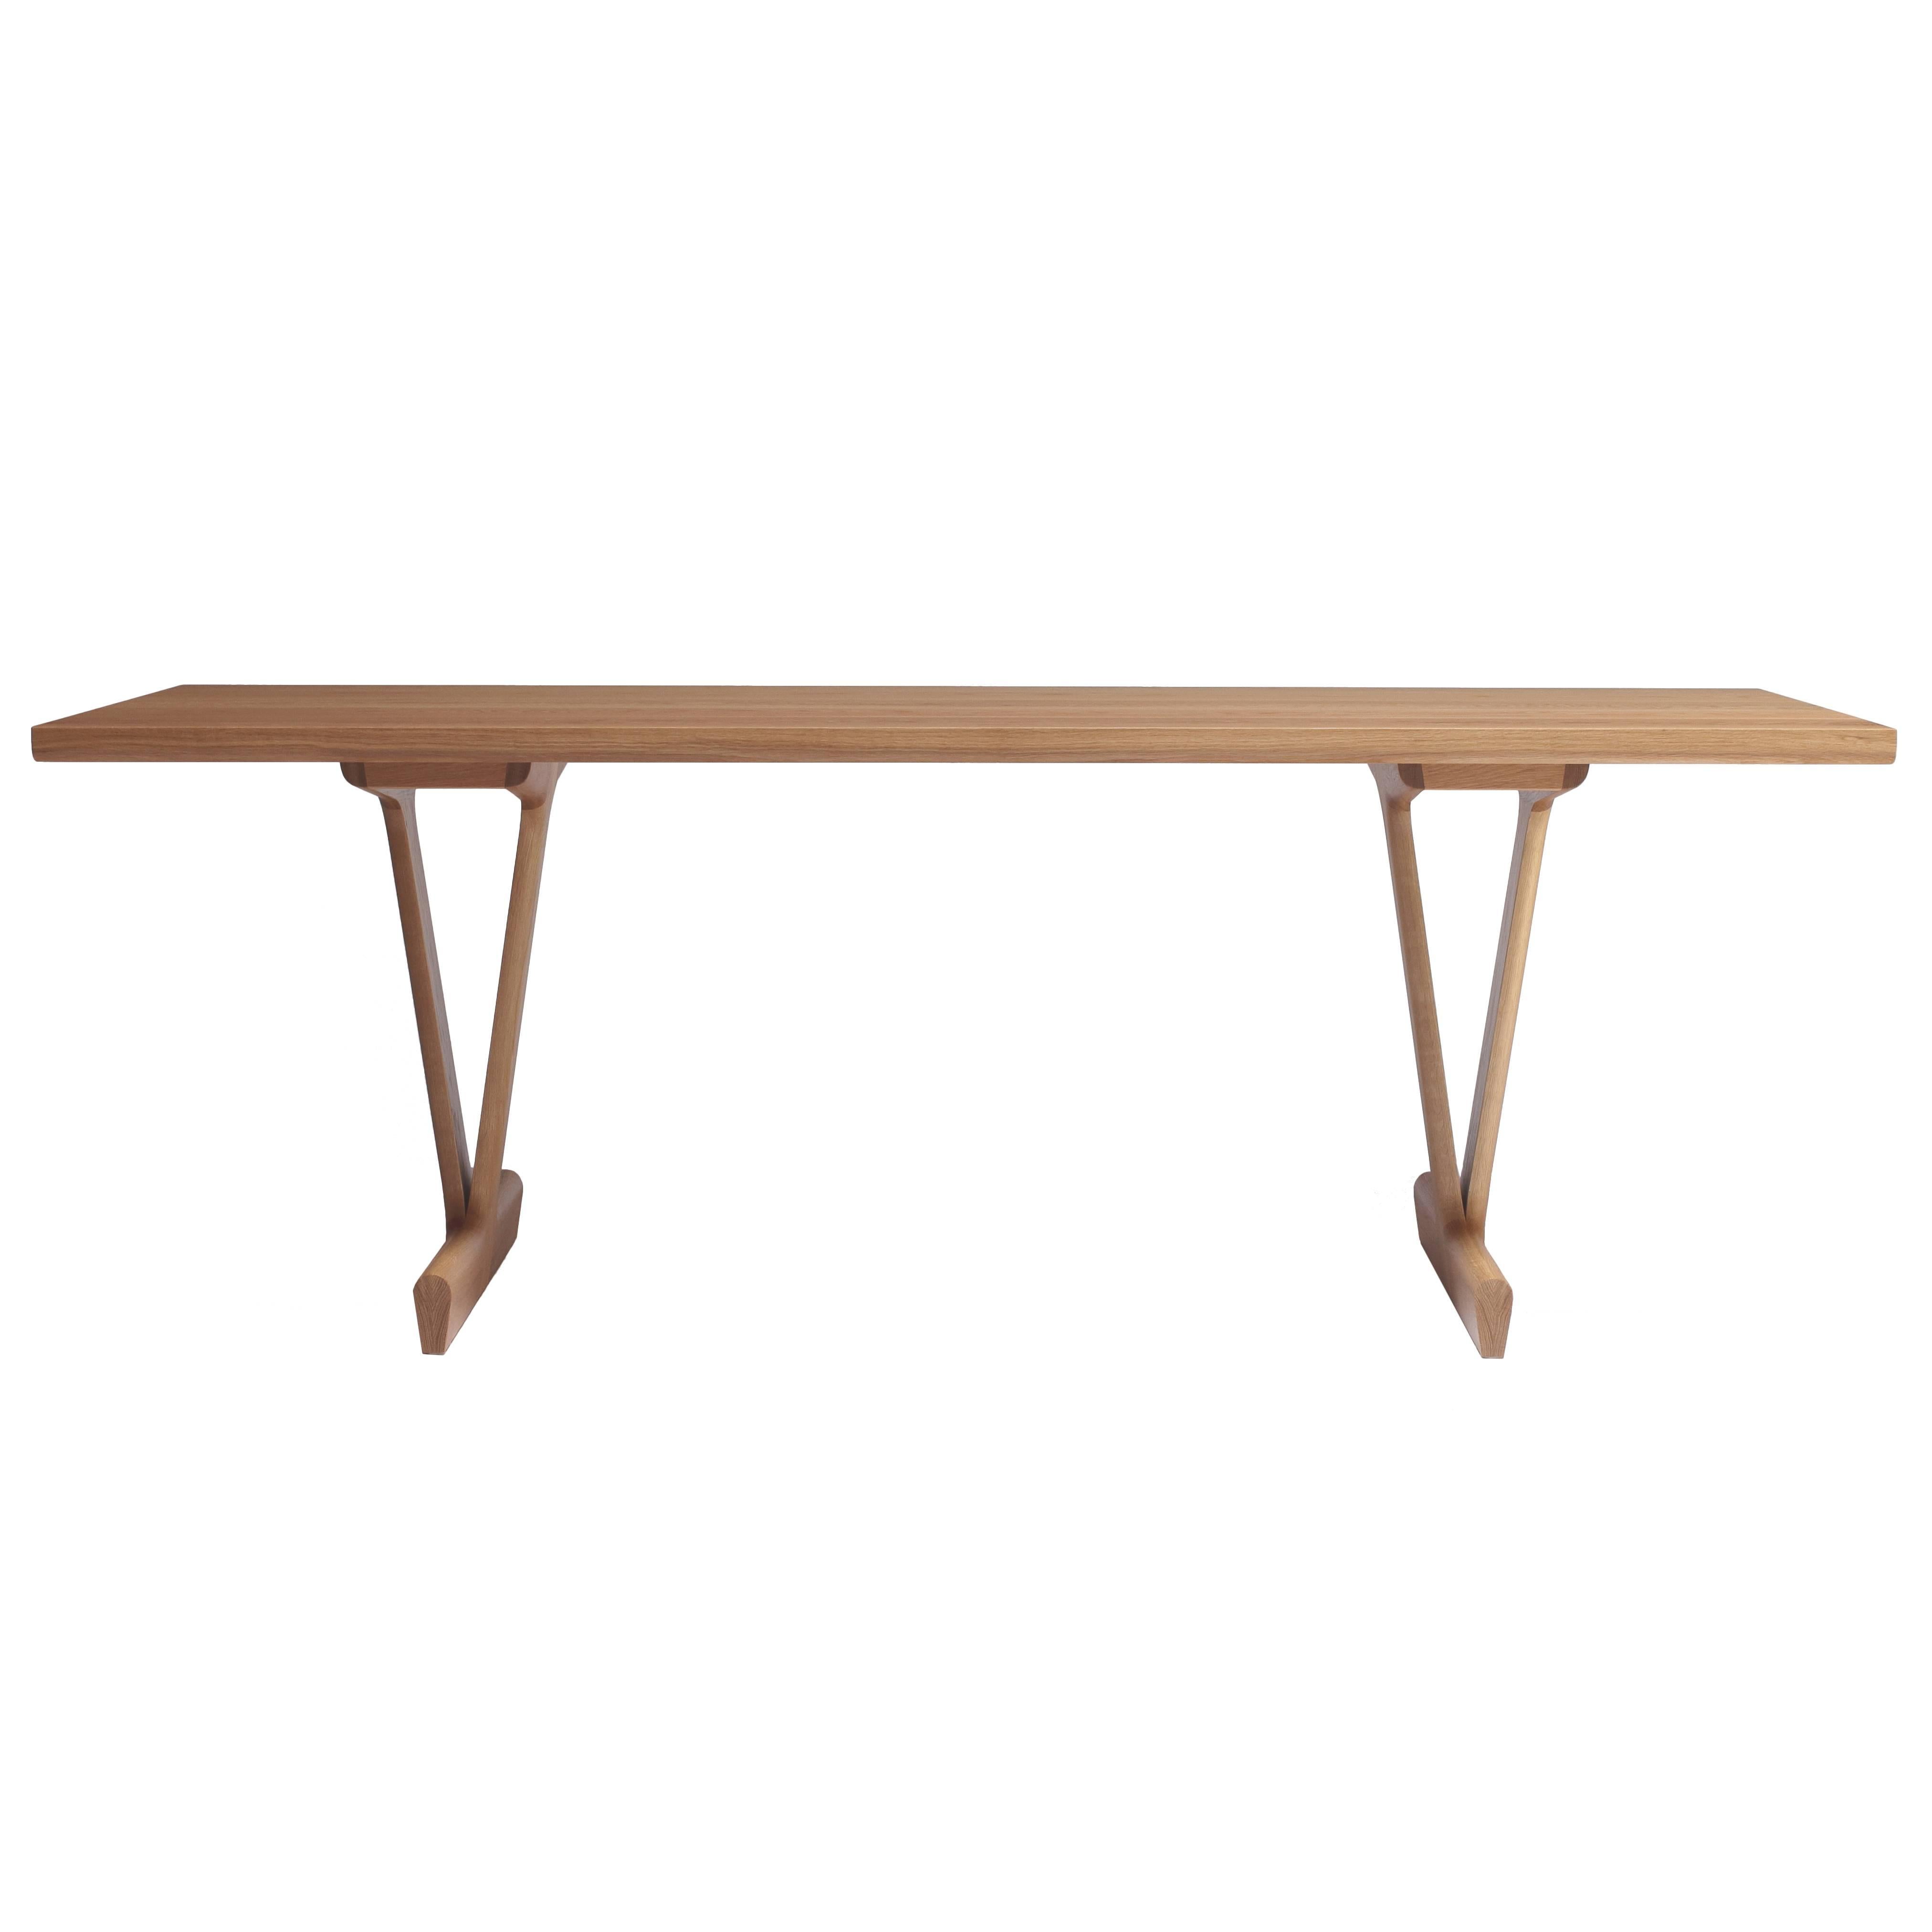 IV Dining Table in Solid White Oak with Trestle Legs